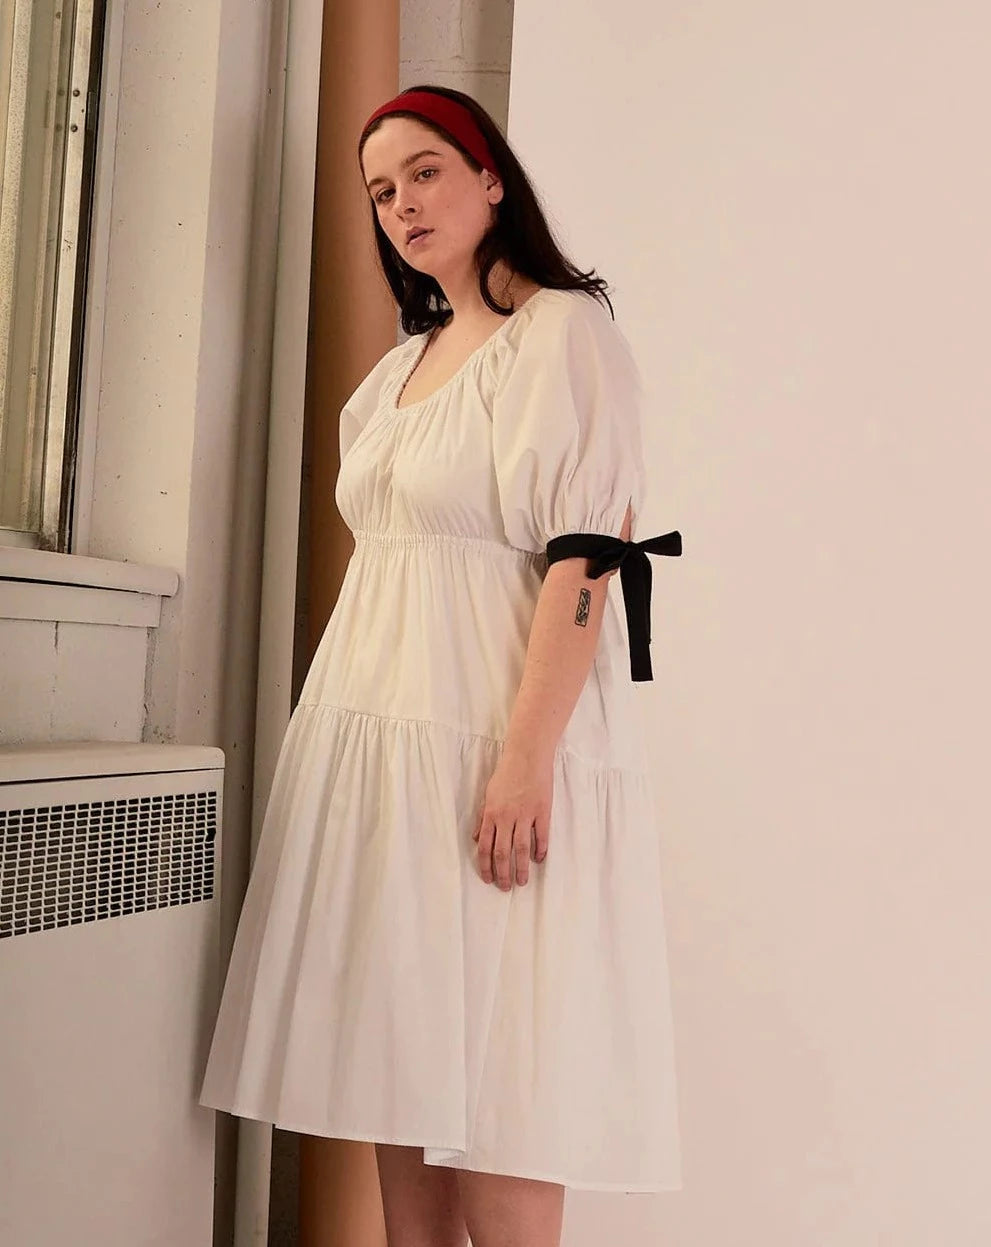 Overall white dress with extra puffy sleeves, gathered tiers, and black bow-tie details, the Jolen dress is both elegant and incredibly comfortable too. It's fully lined with cotton, slips on easily over head, and has pockets. 